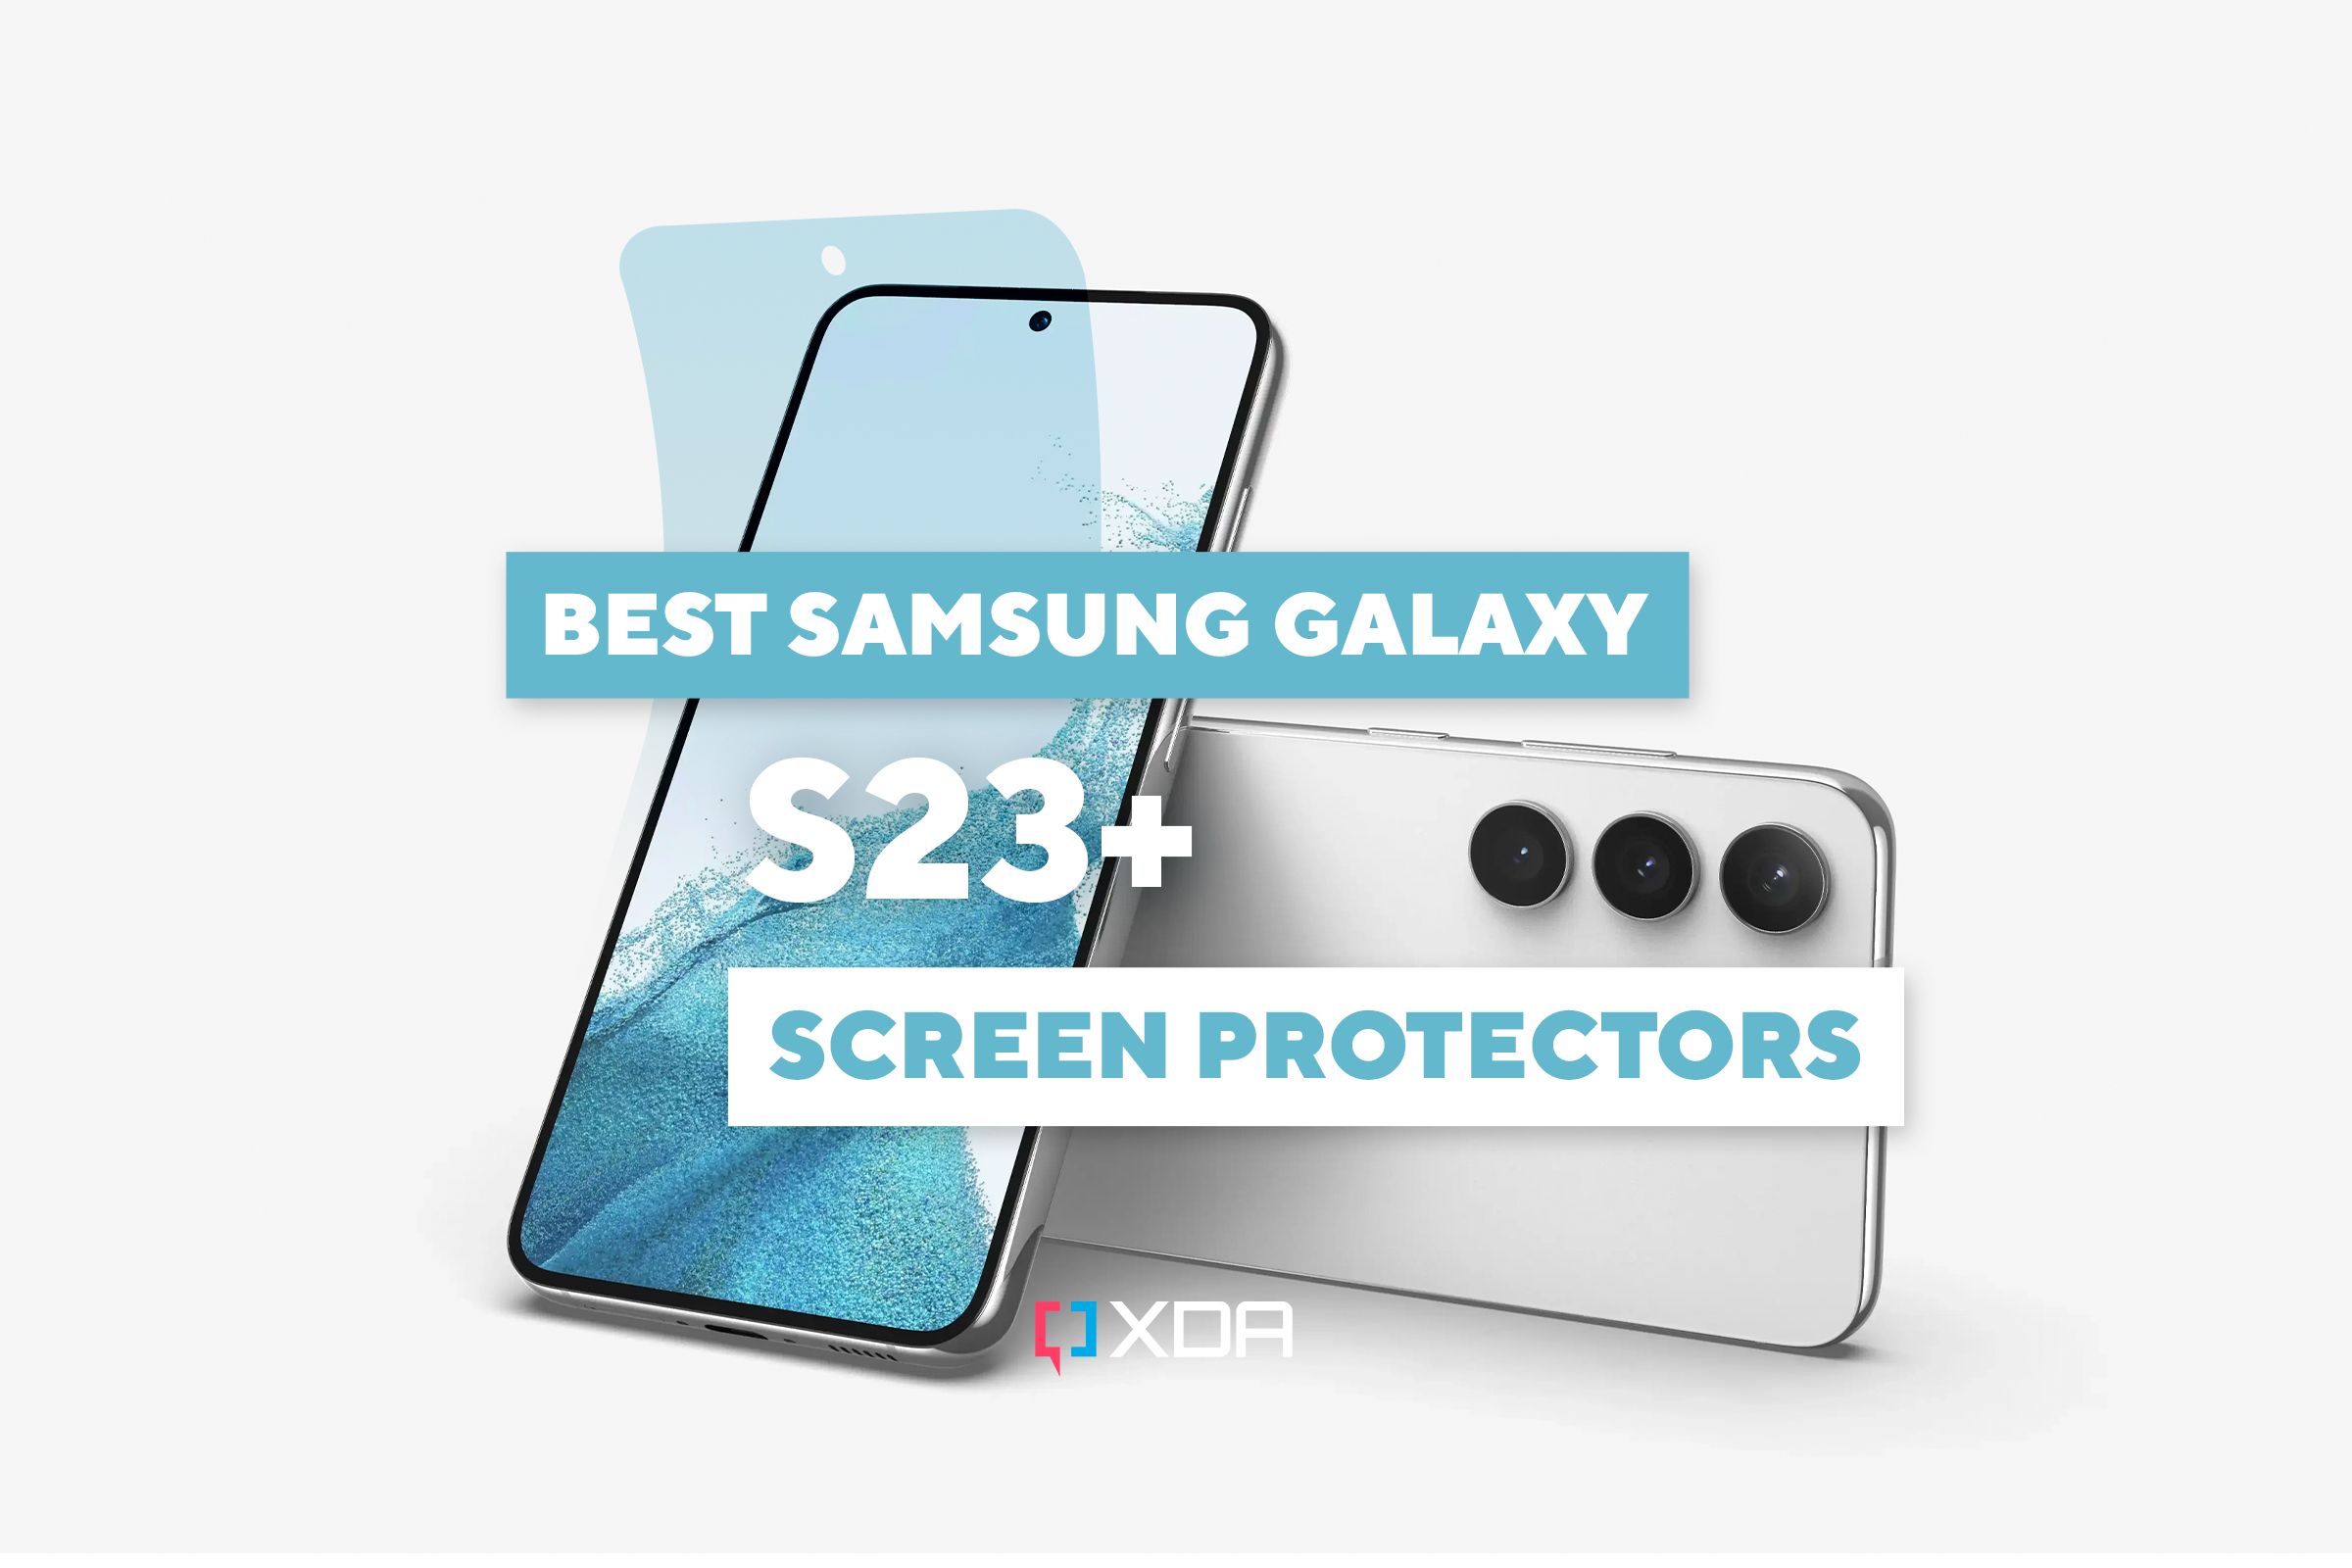 An illuration for the best Samsung Galaxy S23+ screen protectors.